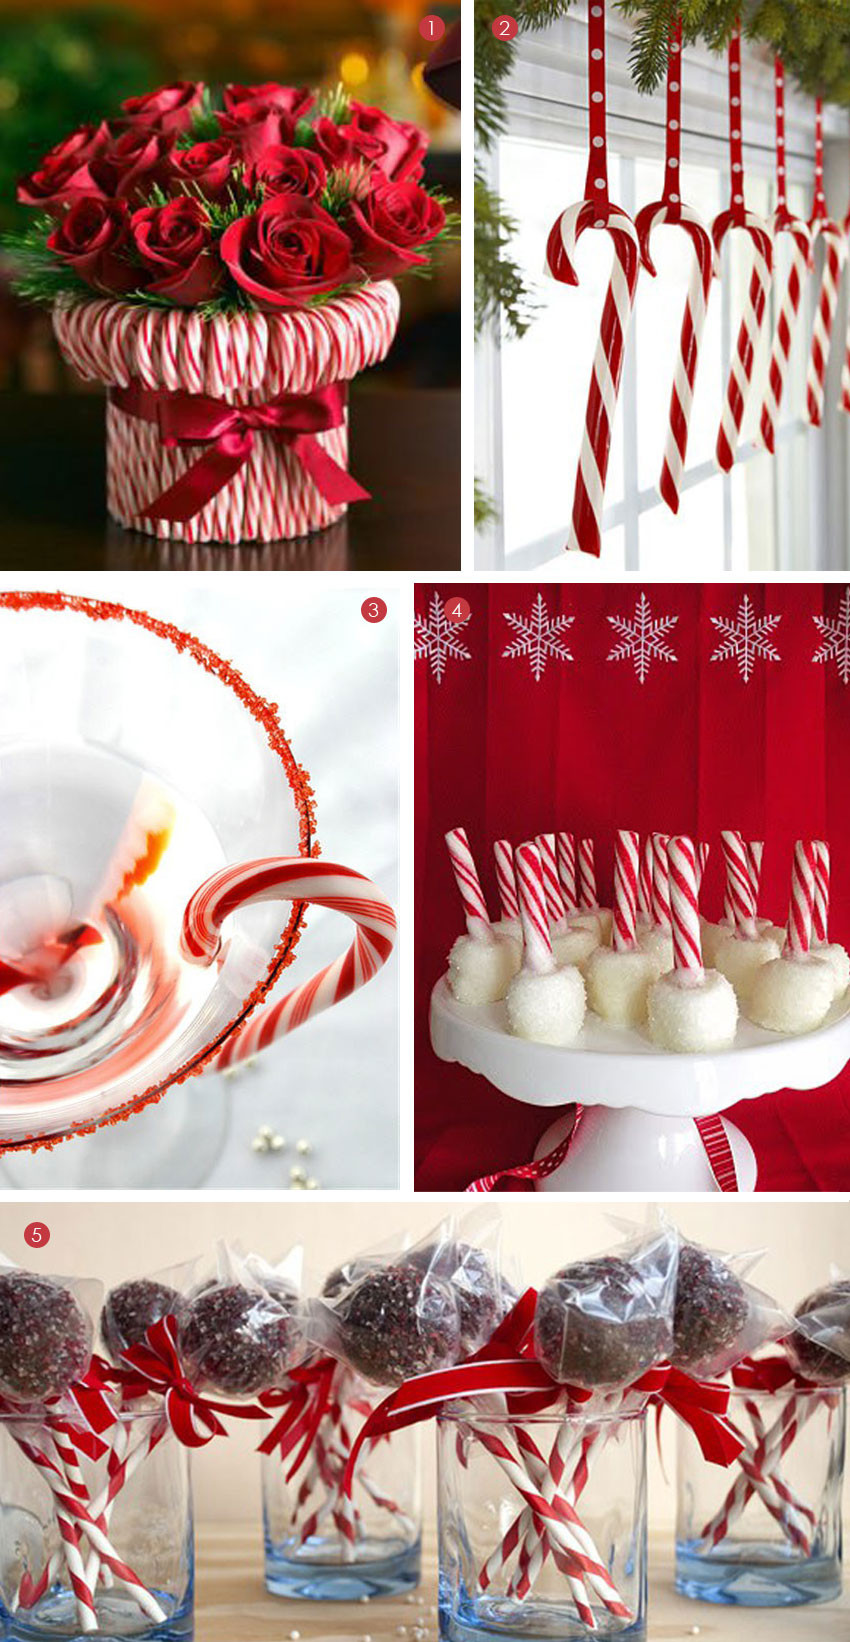 Candy Cane Ideas For Christmas
 Desserts Candy Cane Treats